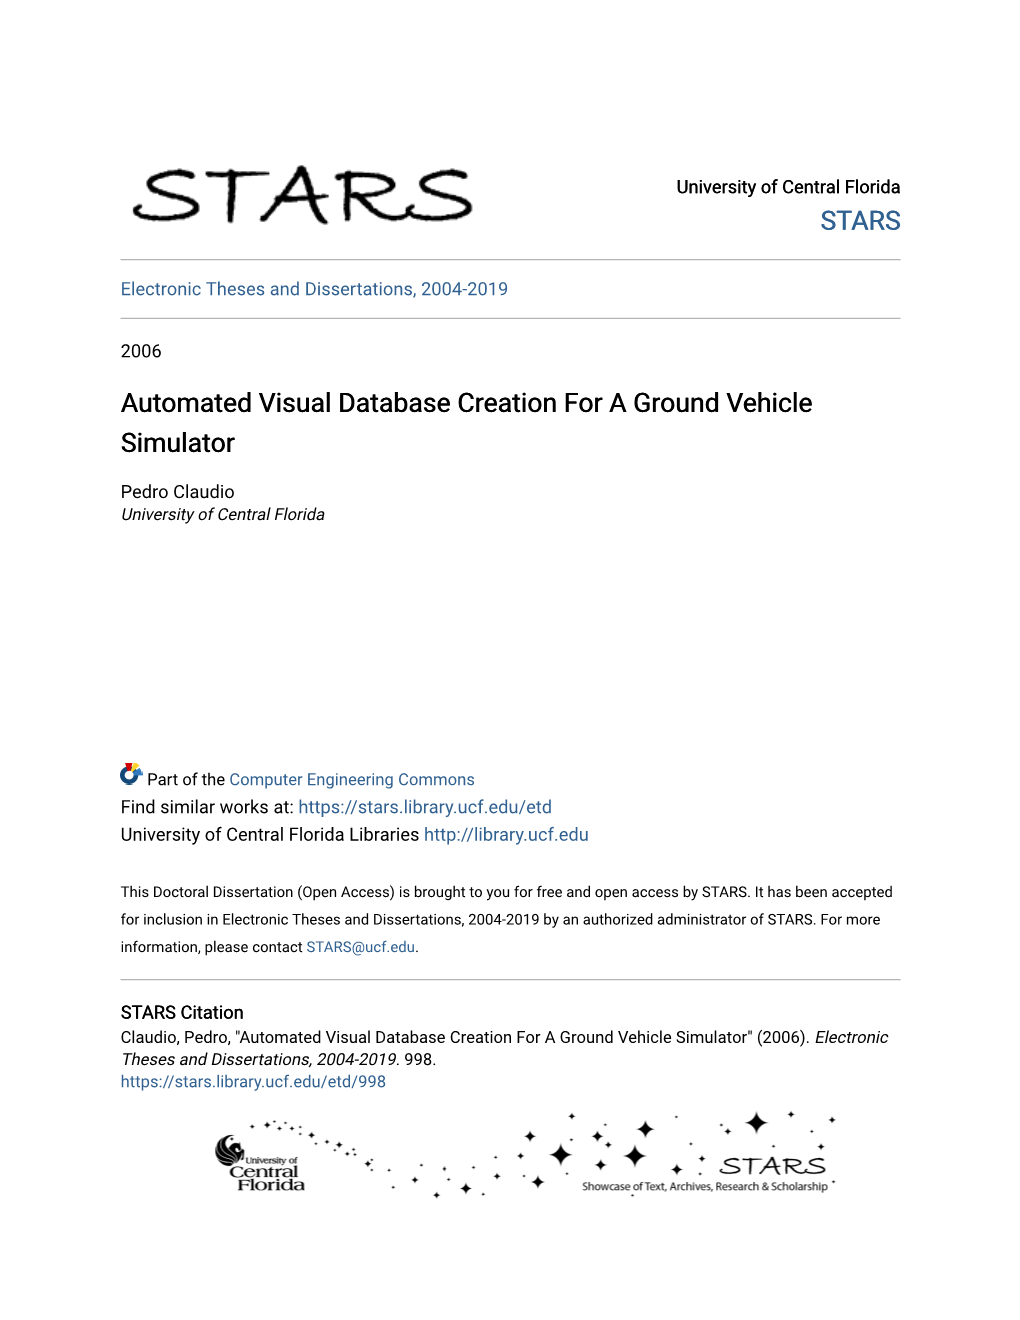 Automated Visual Database Creation for a Ground Vehicle Simulator